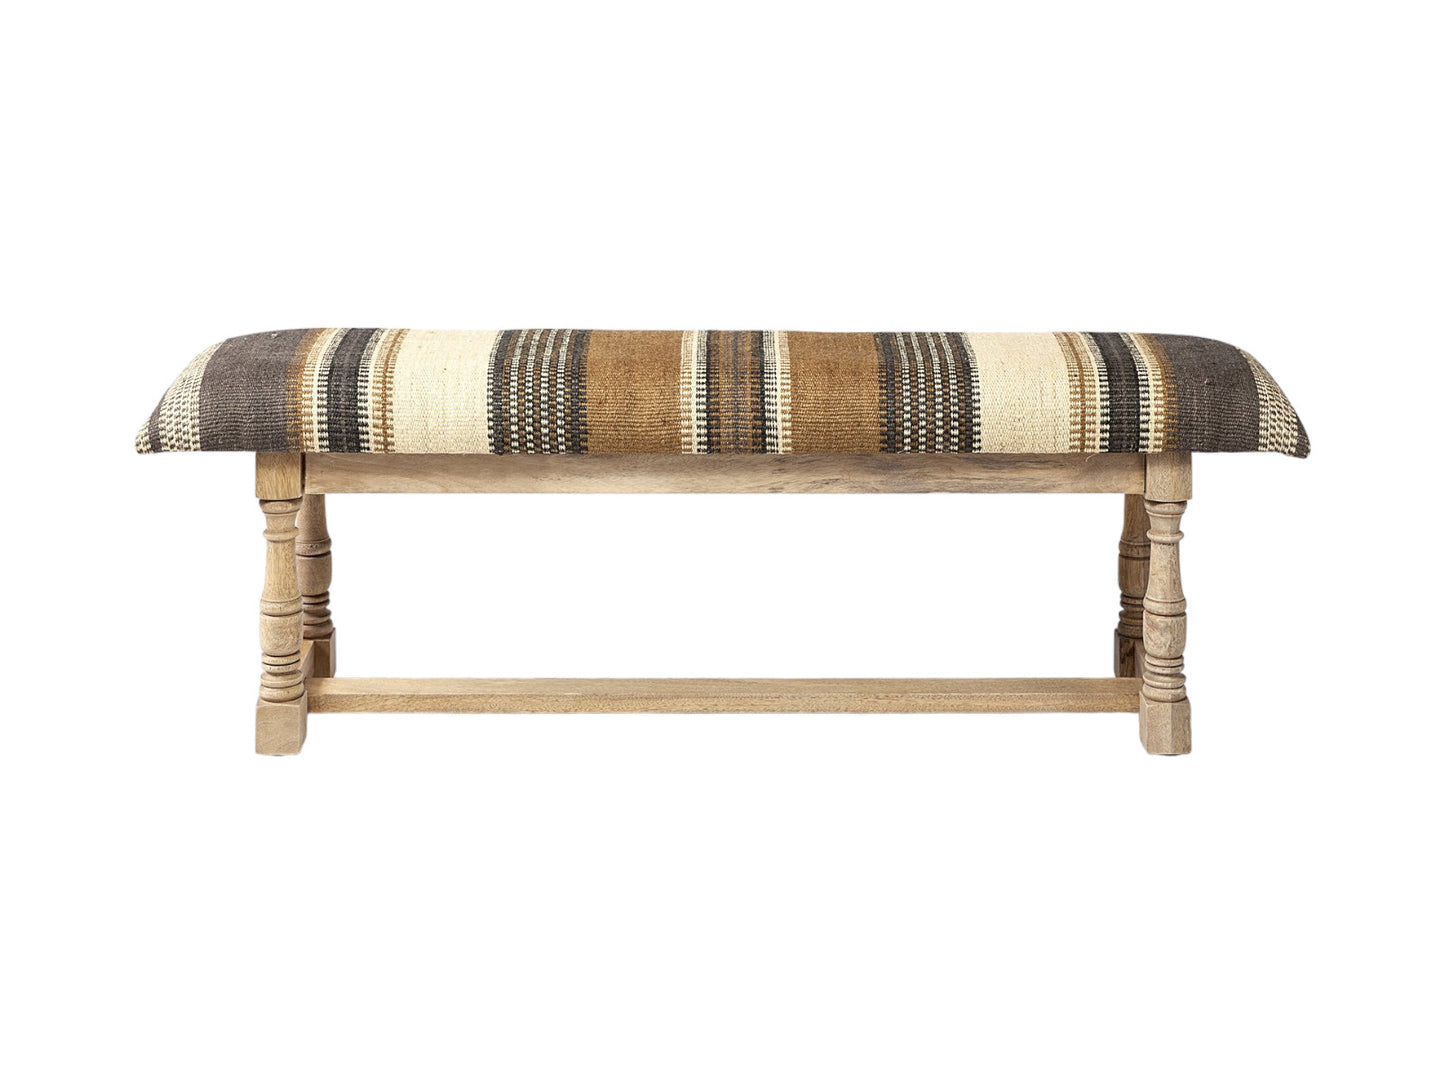 59" Beige and Gray and Brown Upholstered Jute Striped Bench